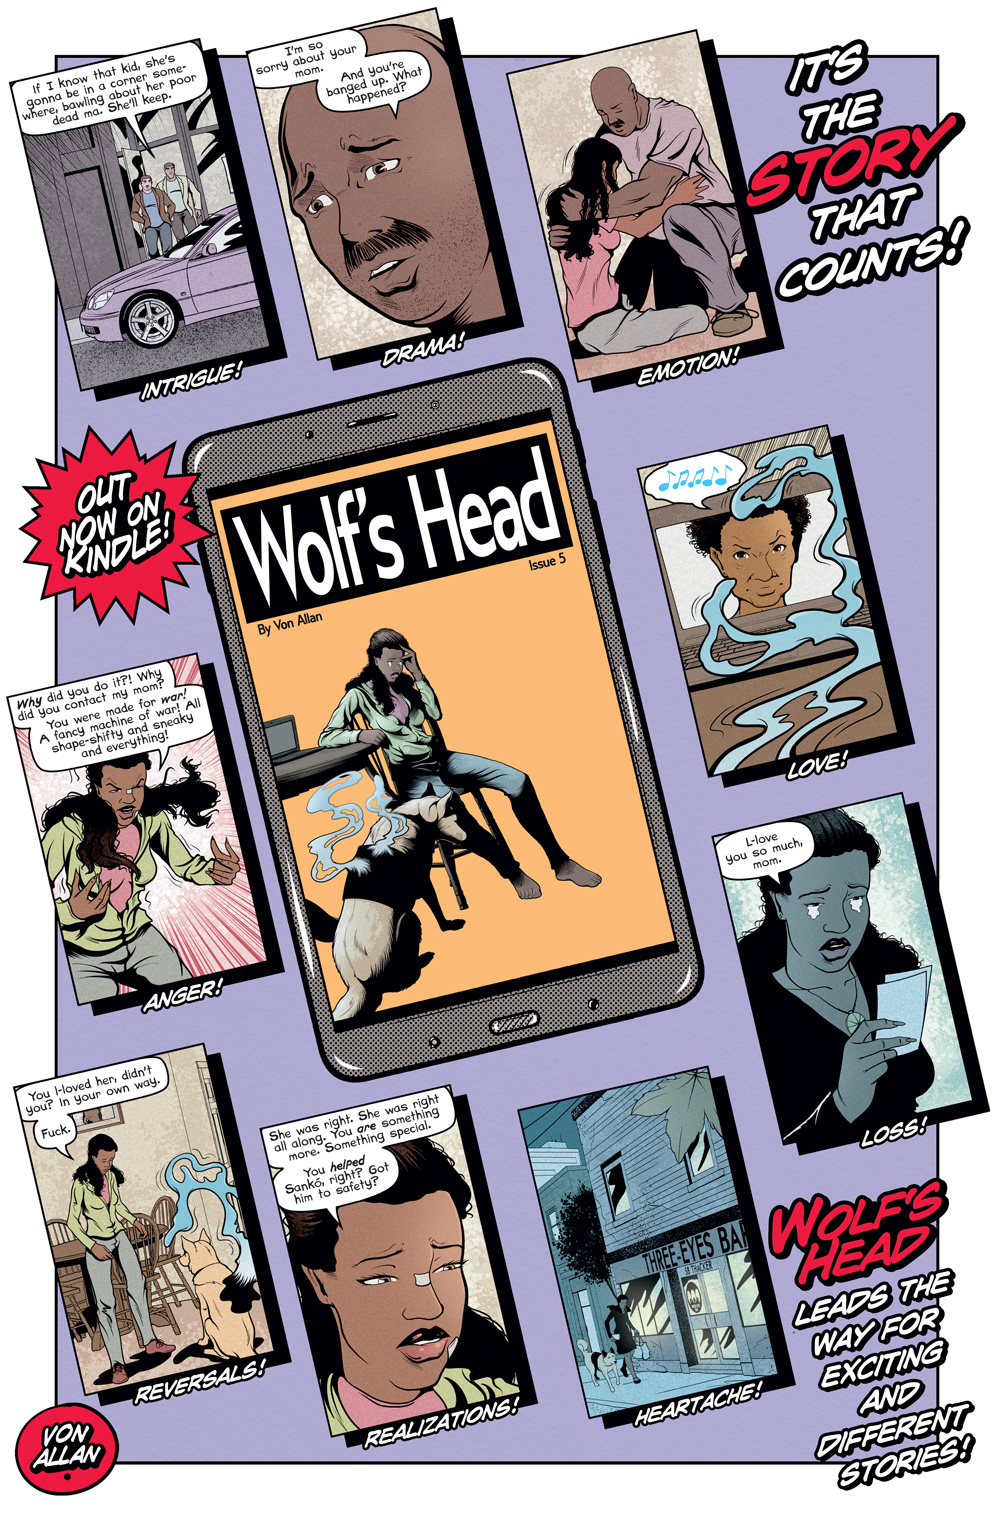 Teaser image for Wolf's Head issue 5 on Kindle